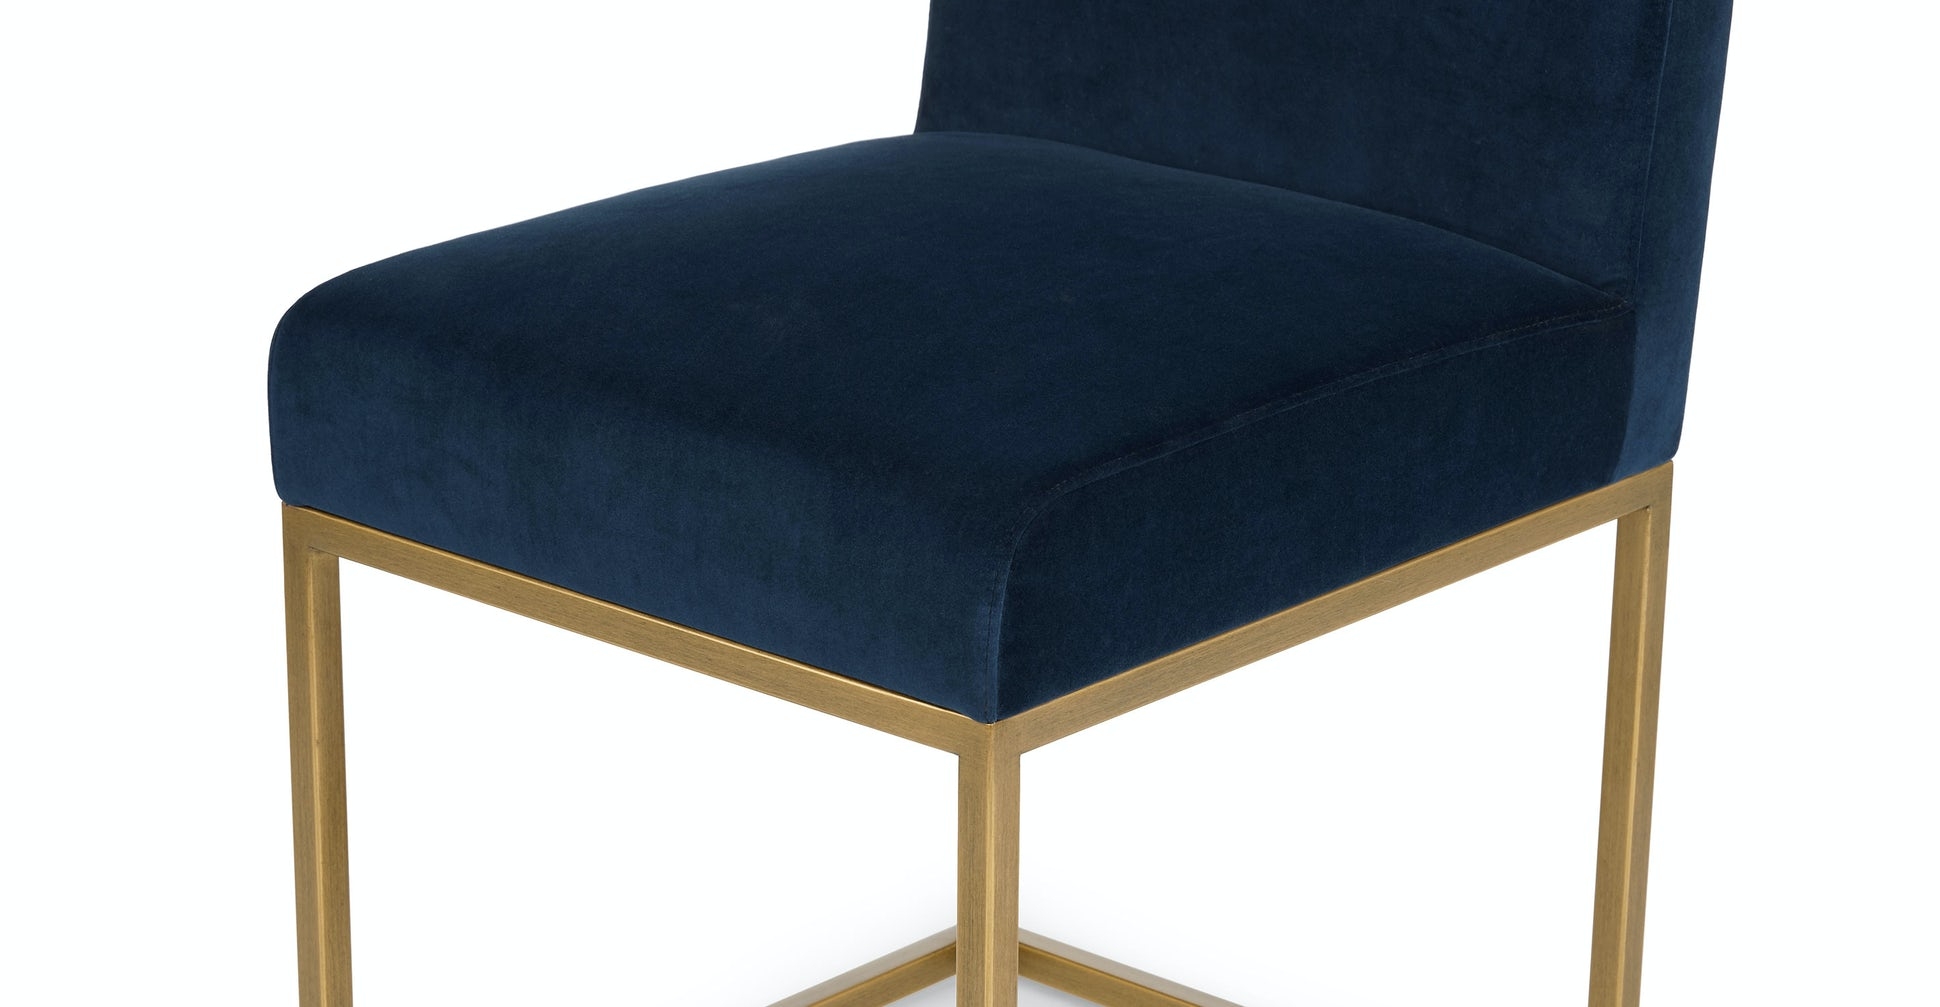 Oscuro Tidal Blue Dining Chair (sold as pair) - Image 2